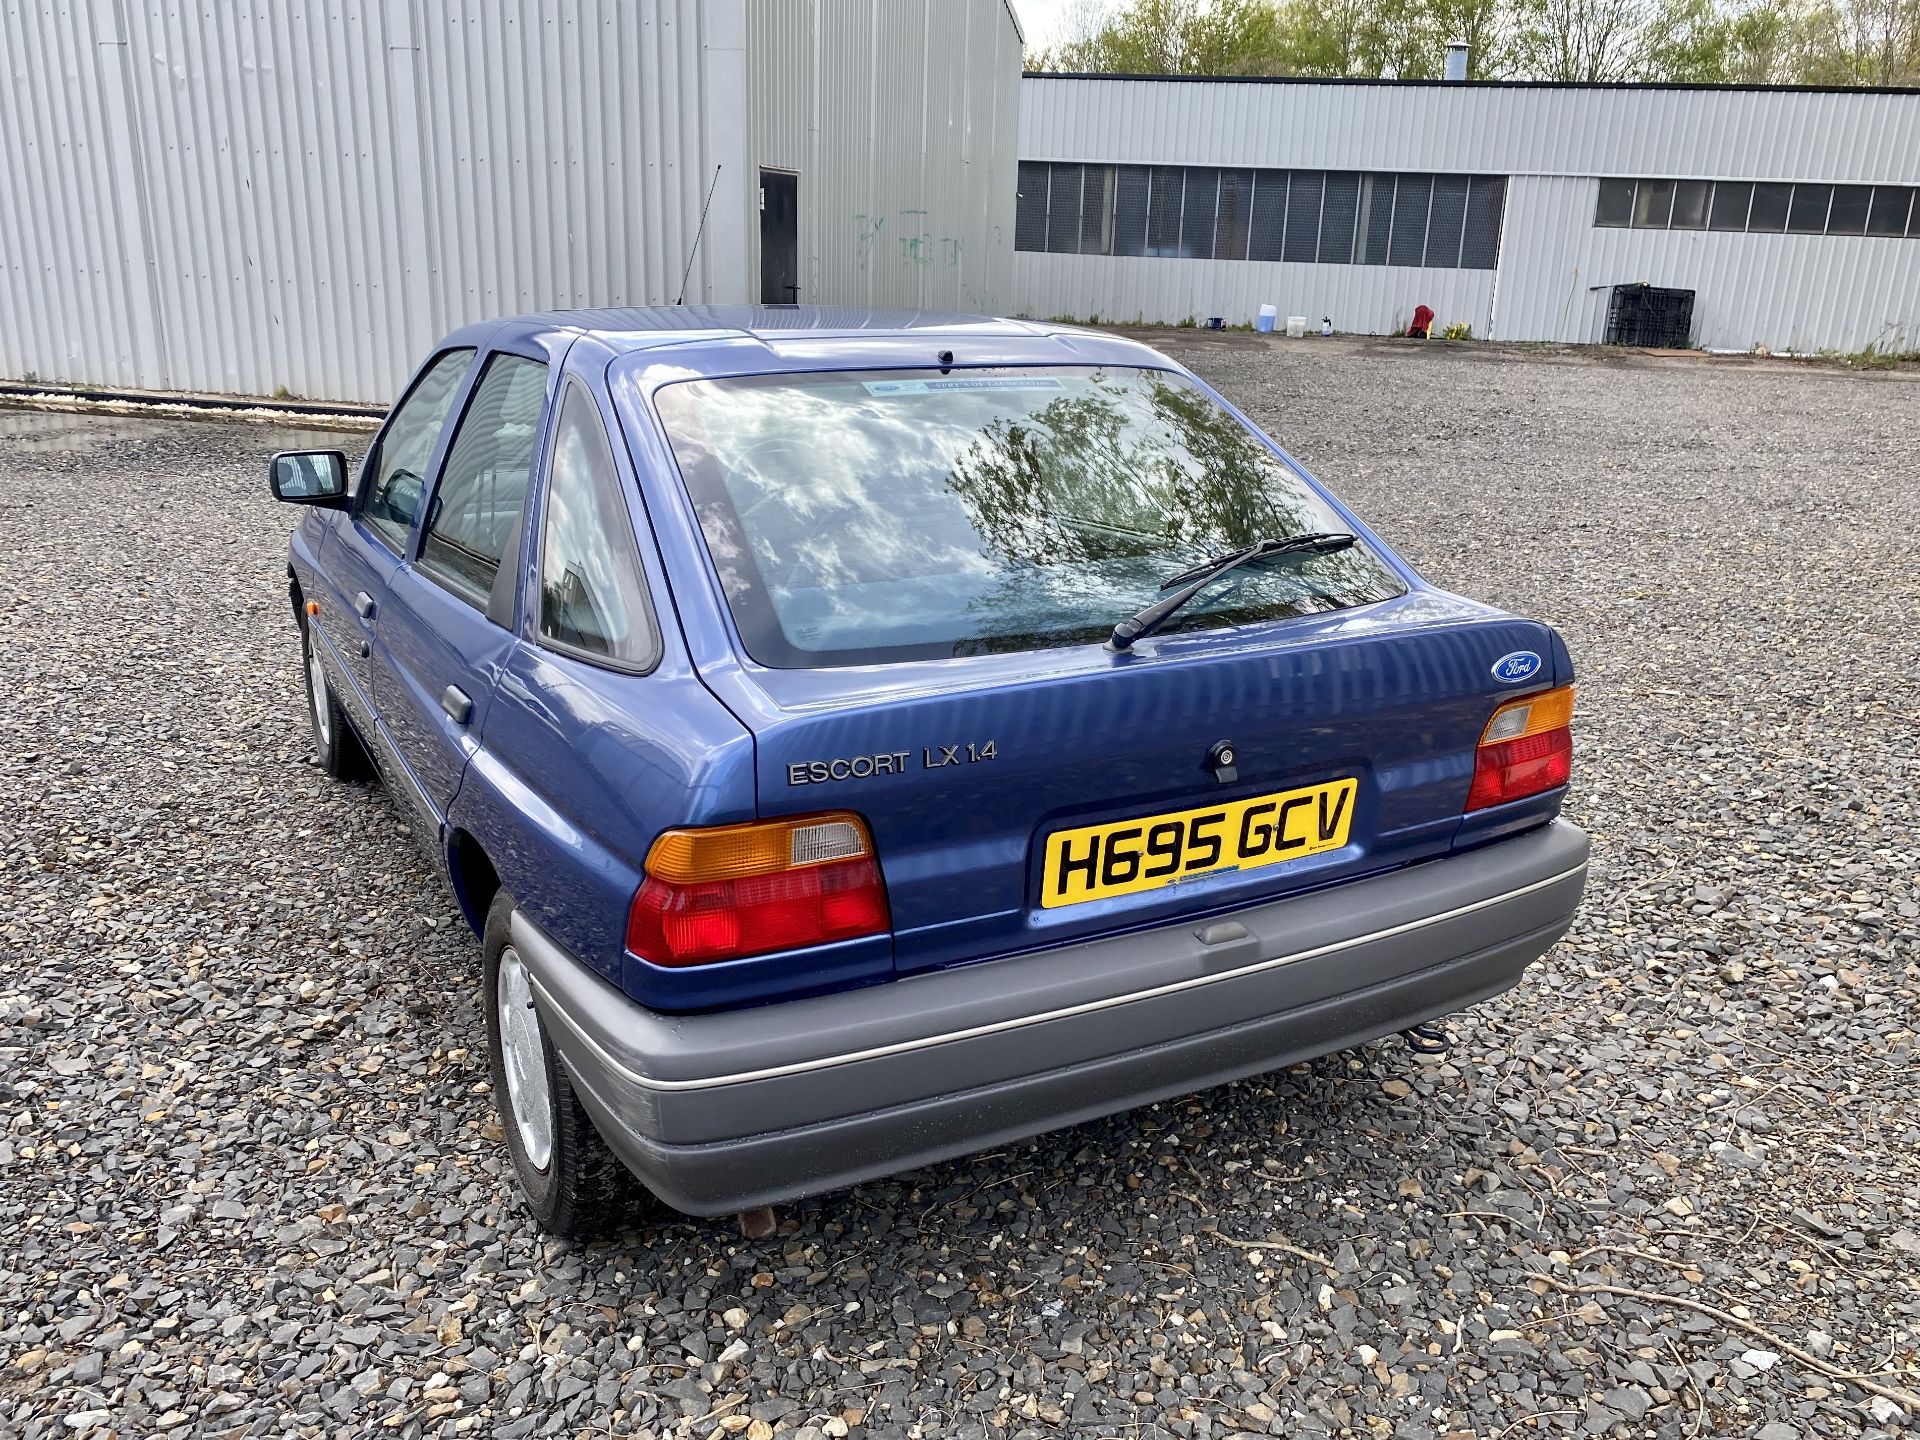 Ford Escort LX1.4 - Image 12 of 54